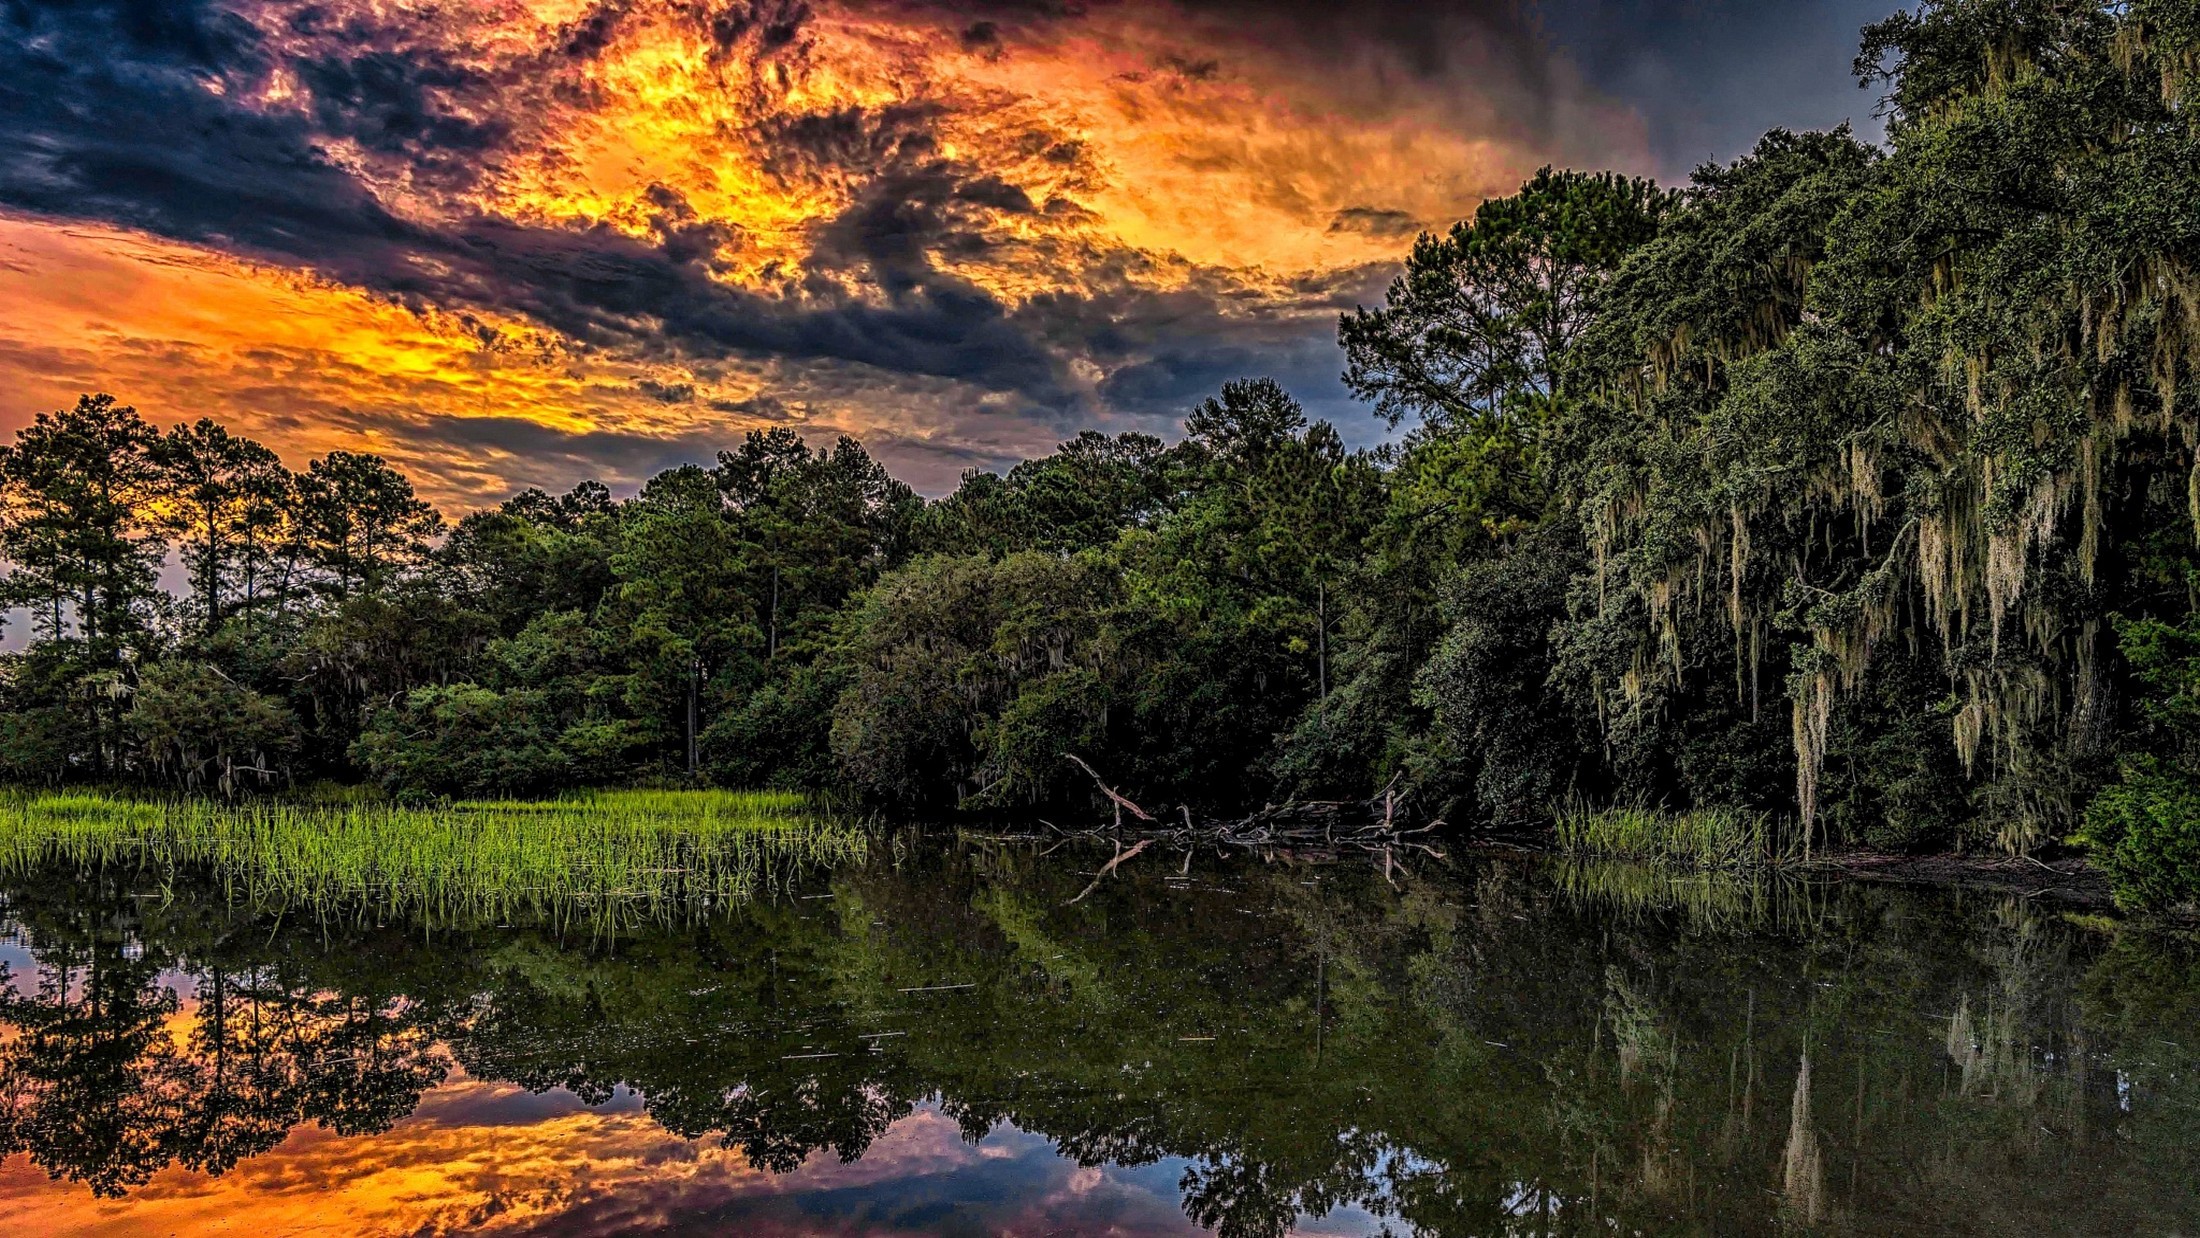 nature, Landscape, Sunset, HDR, River, Reflection, Summer, South Carolina, Clouds, Forest, Sky, Water, Trees, Foliage, Reeds Wallpaper